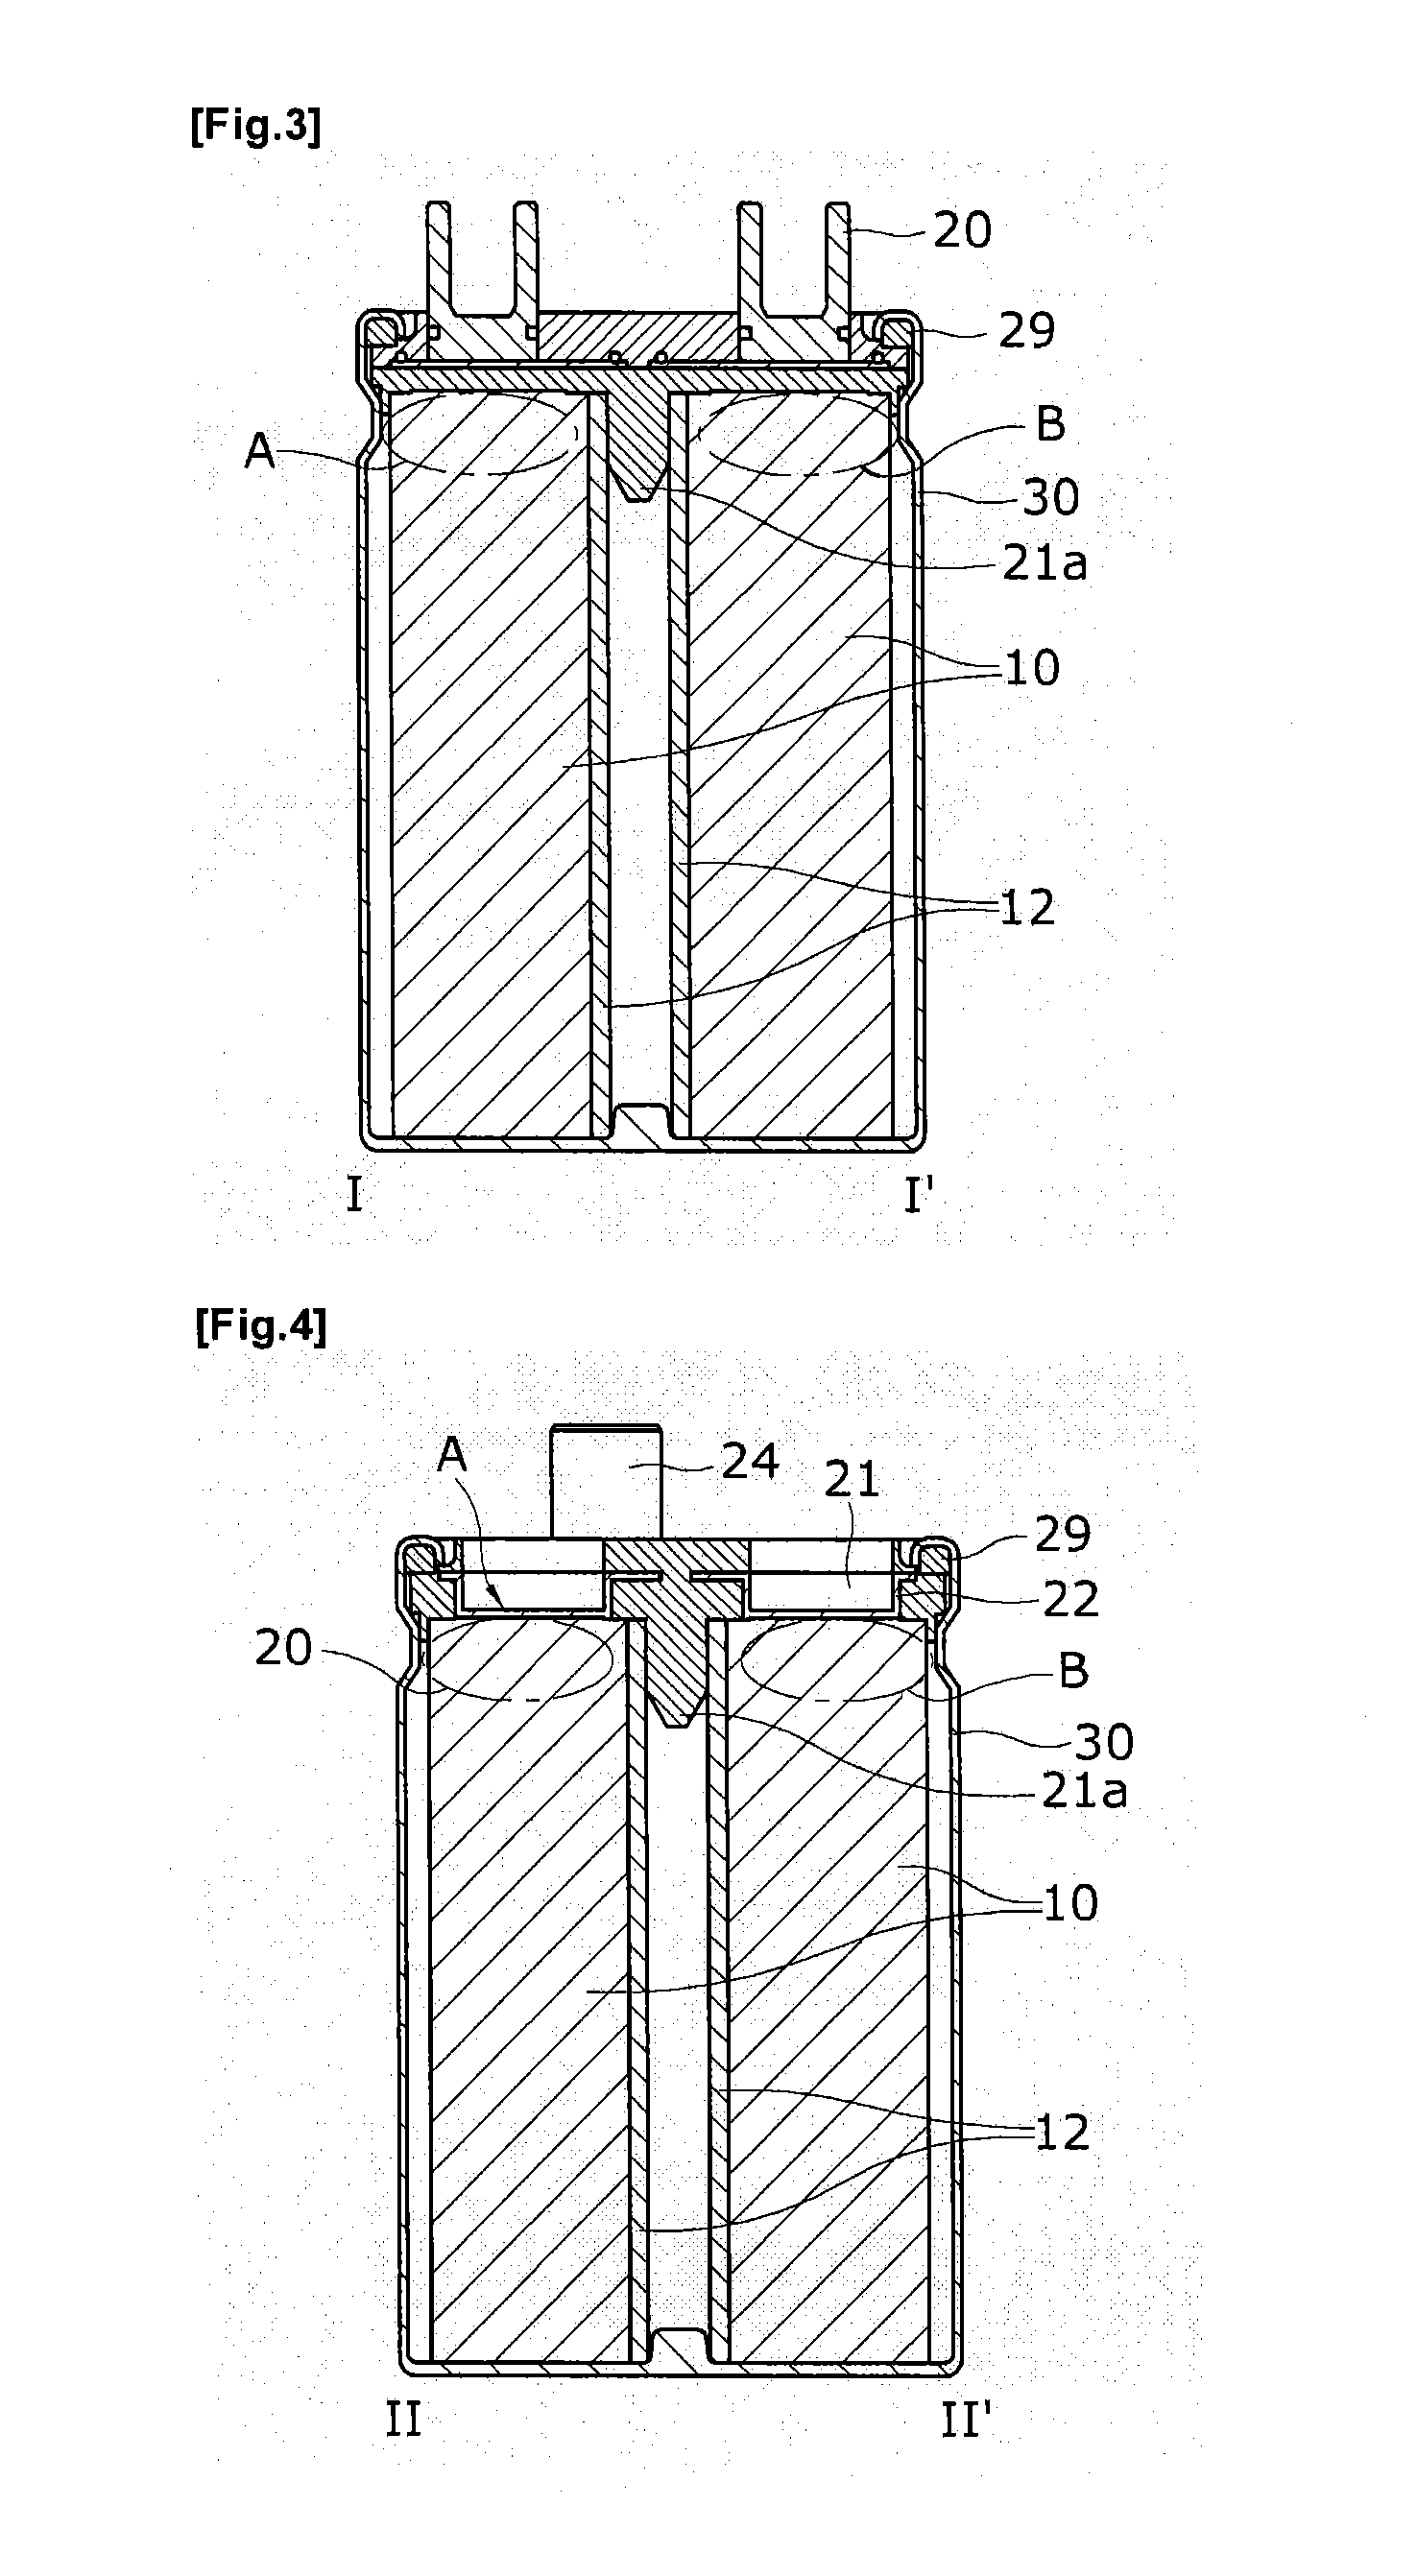 Electrical energy storage device